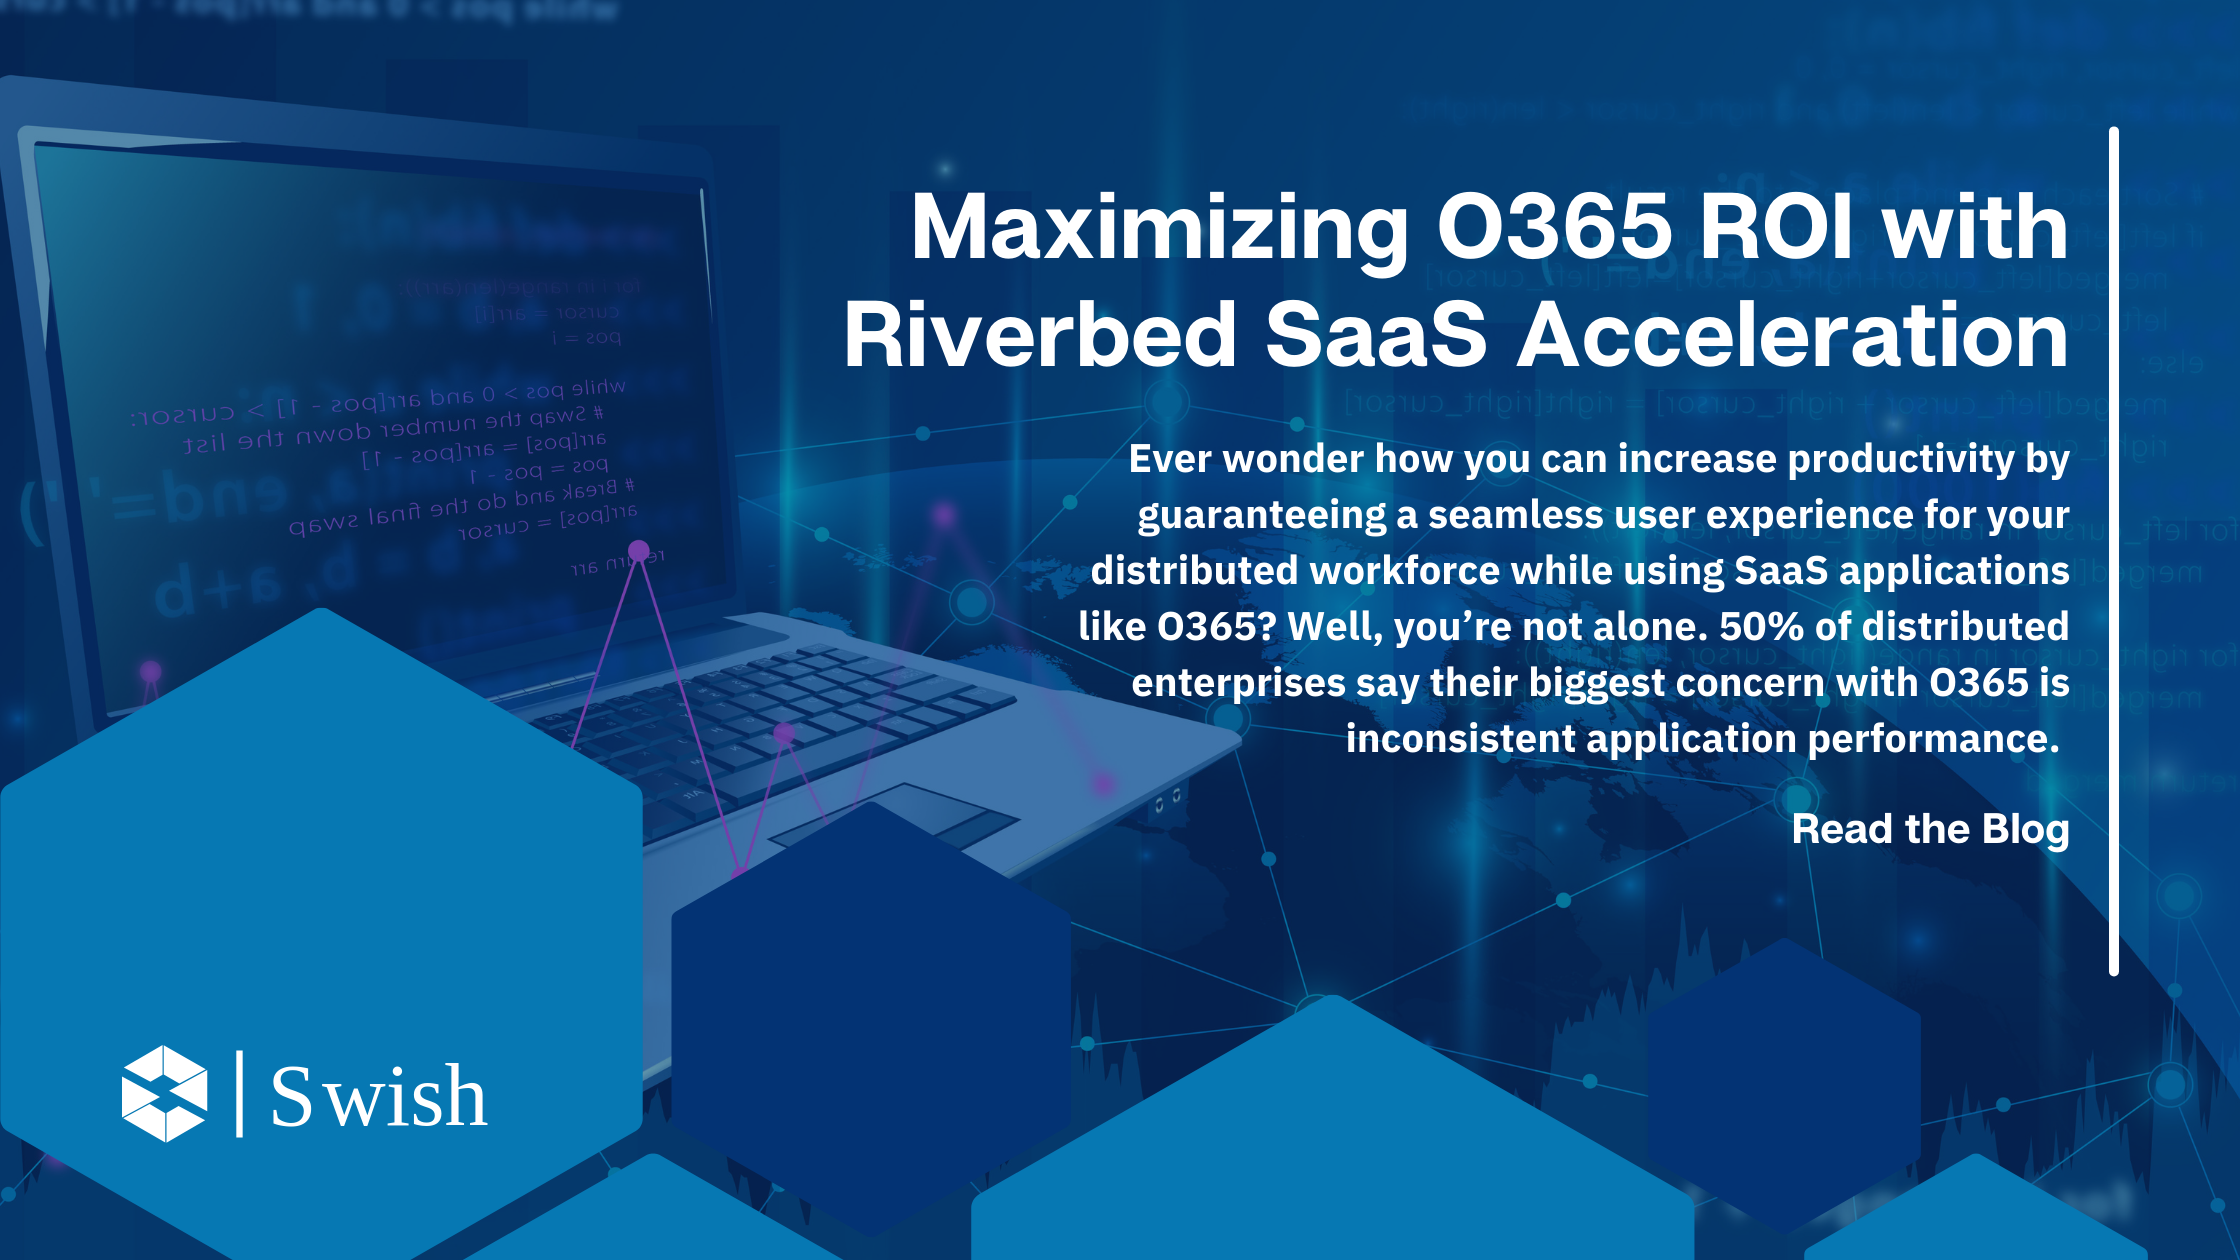 Maximizing 0365 ROI with Riverbed SaaS Acceleration